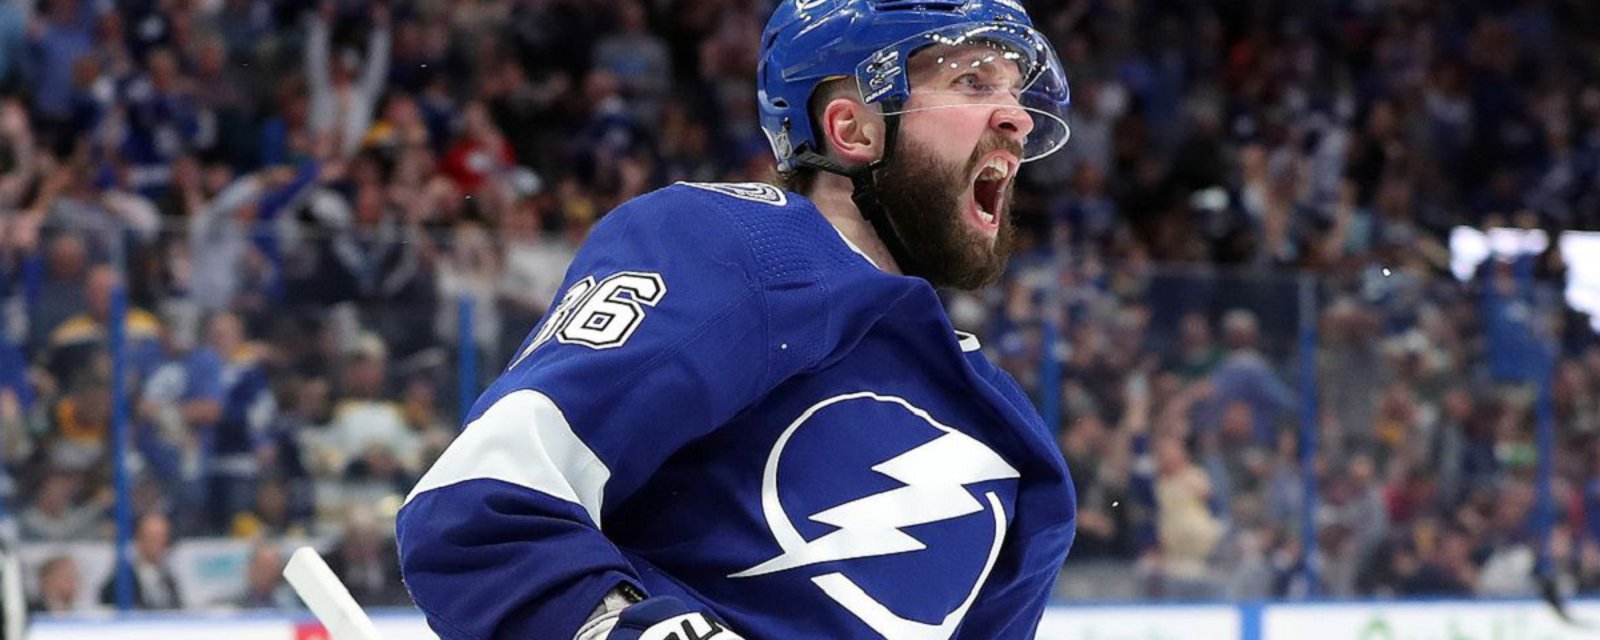 Consequences for Kucherov after ugly performance at All-Star Game.